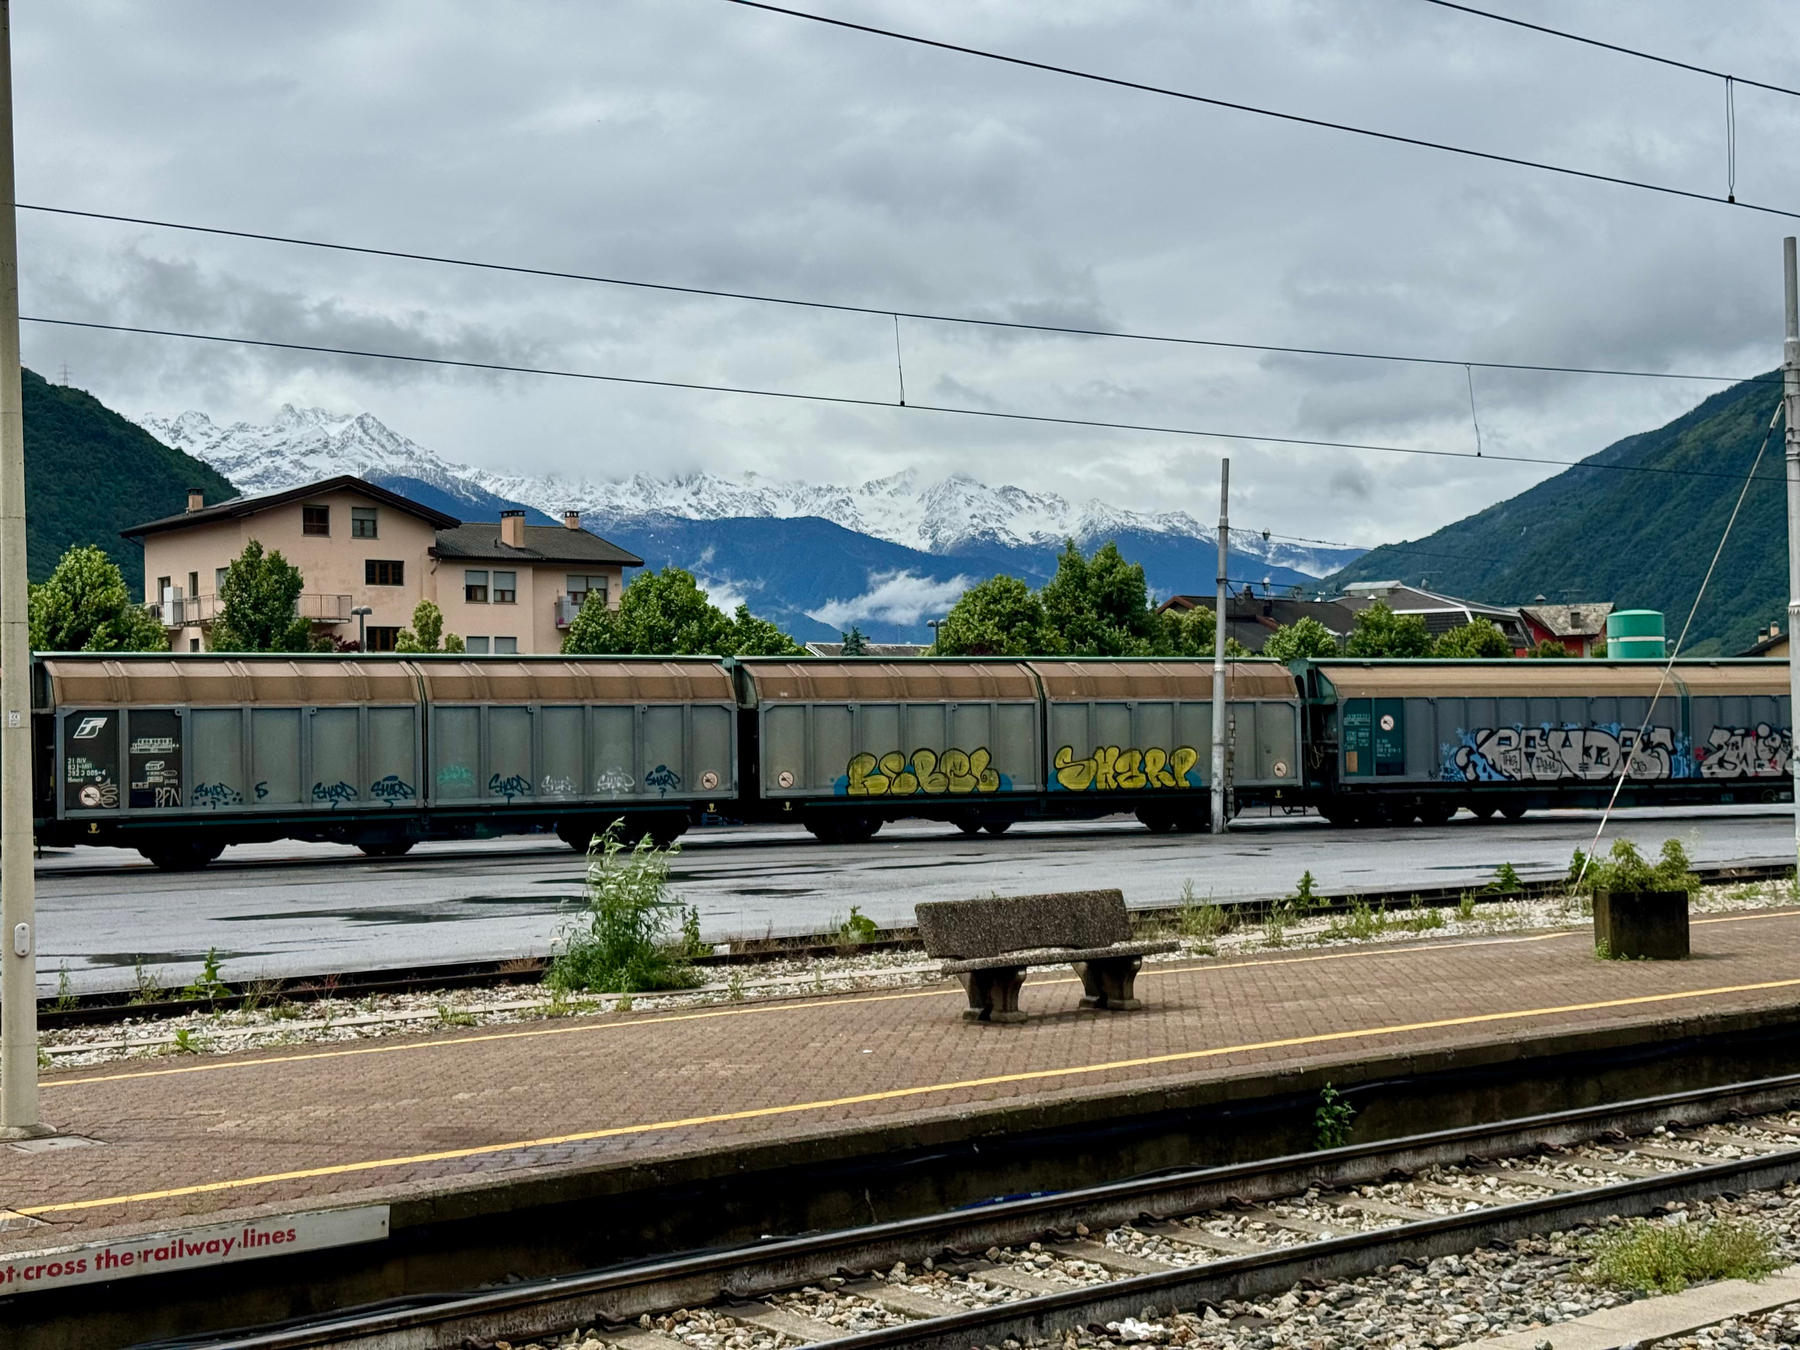 A railway station platform with a bench and a view of train cars covered in graffiti. In the background are residential buildings and snow-capped mountains under a cloudy sky.